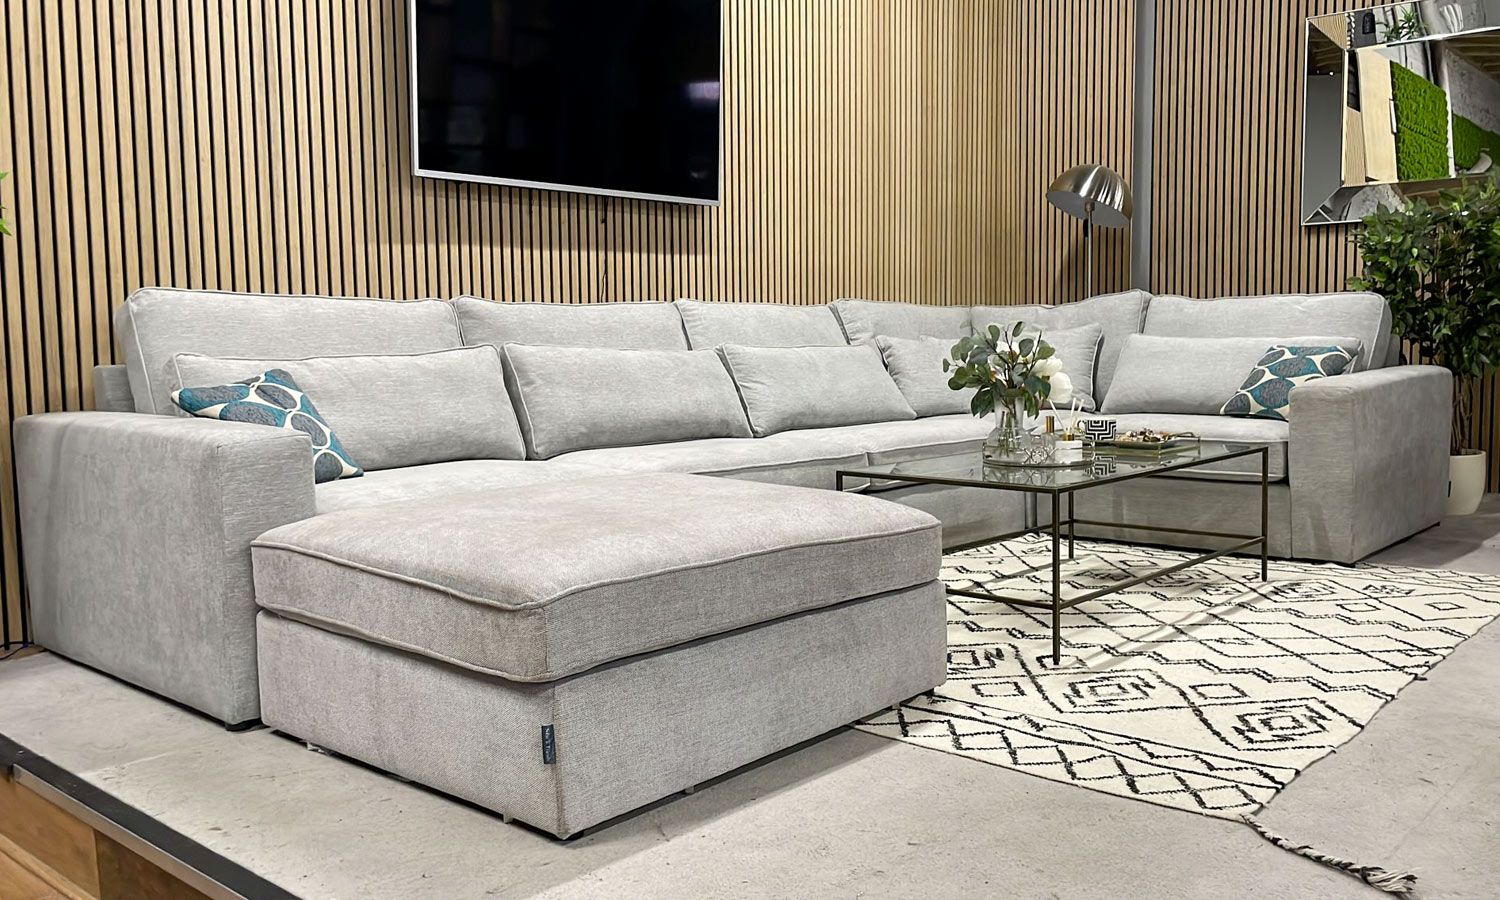 Navagio Light Grey Ascot Fabric U Shaped Sofa – Sofas & Friends With Sofas In Light Grey (View 5 of 15)